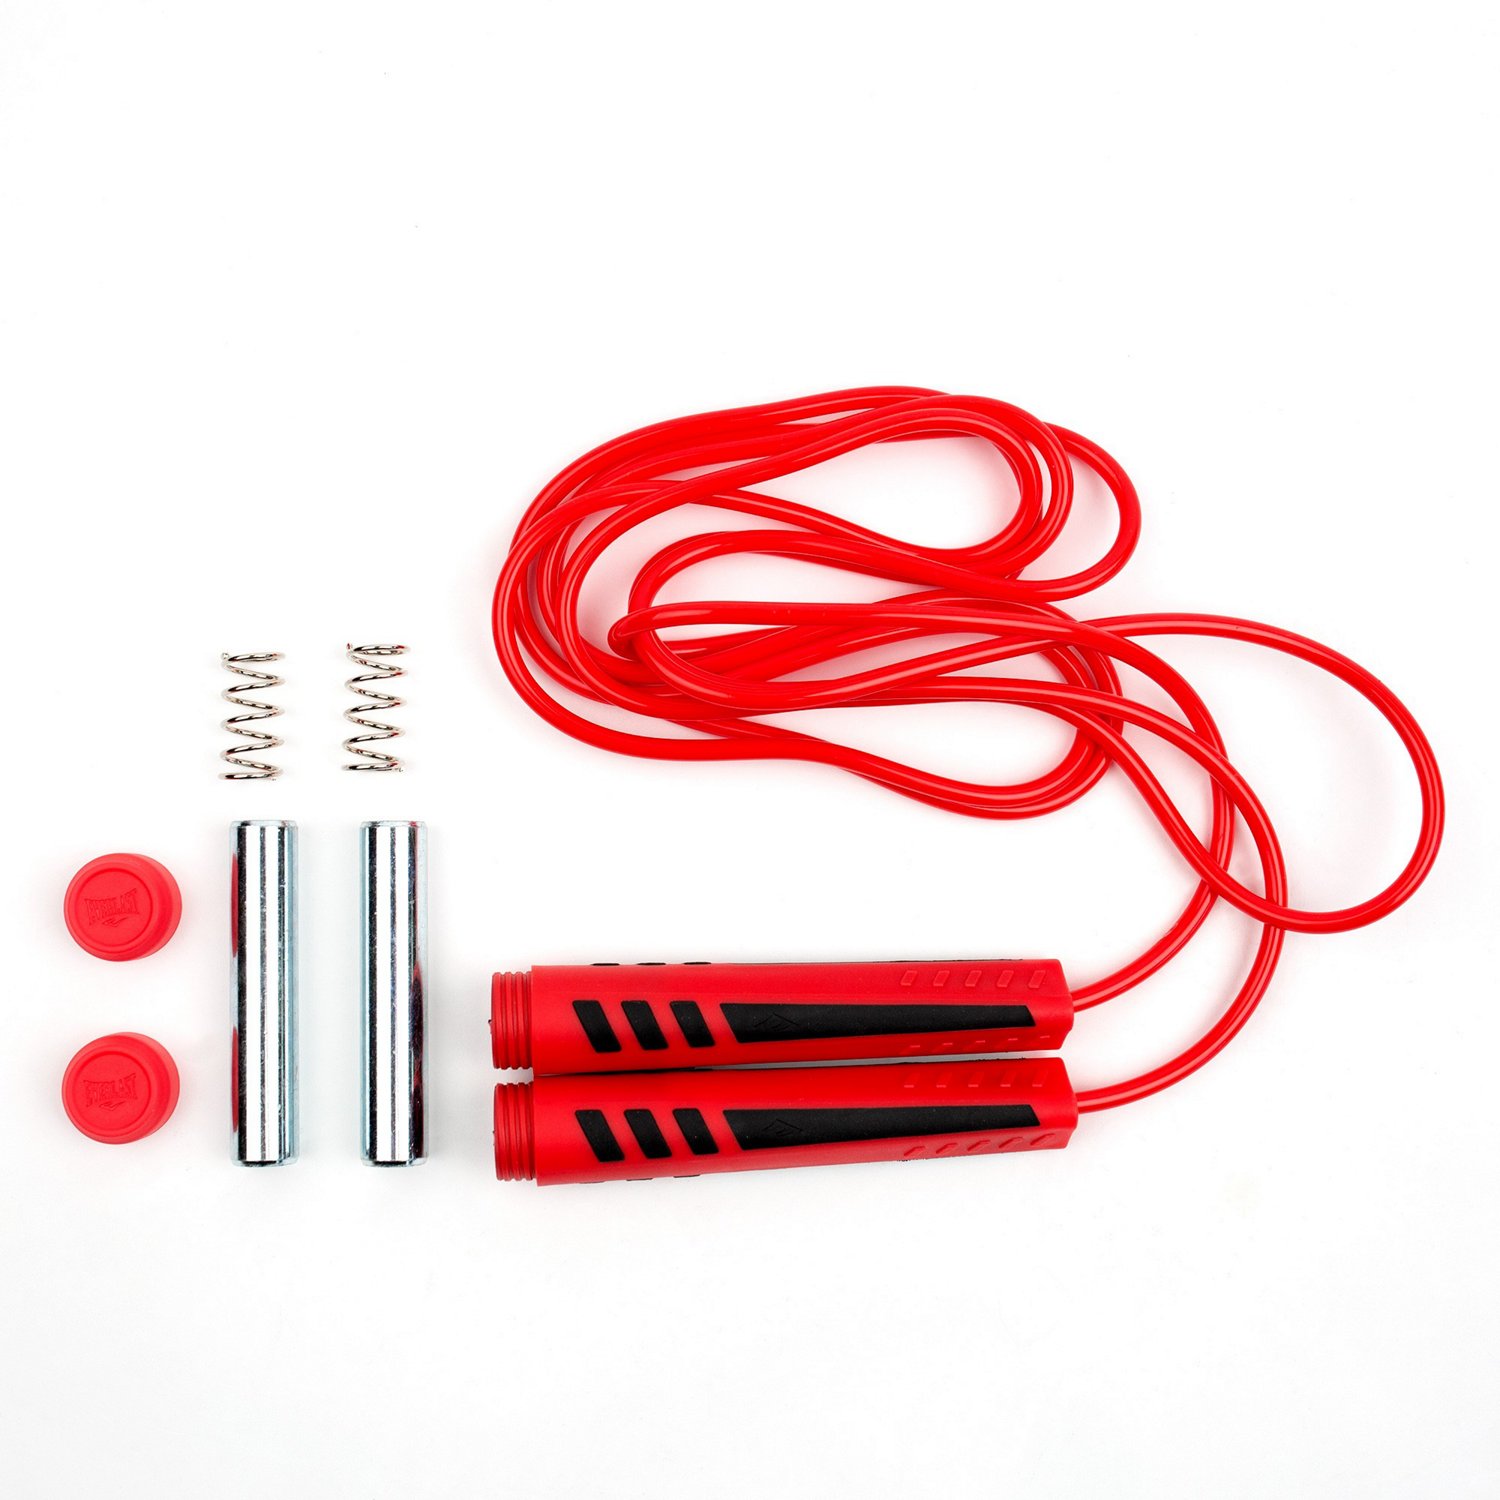 Everlast® EverGrip™ Weighted Jump Rope | Free Shipping at Academy